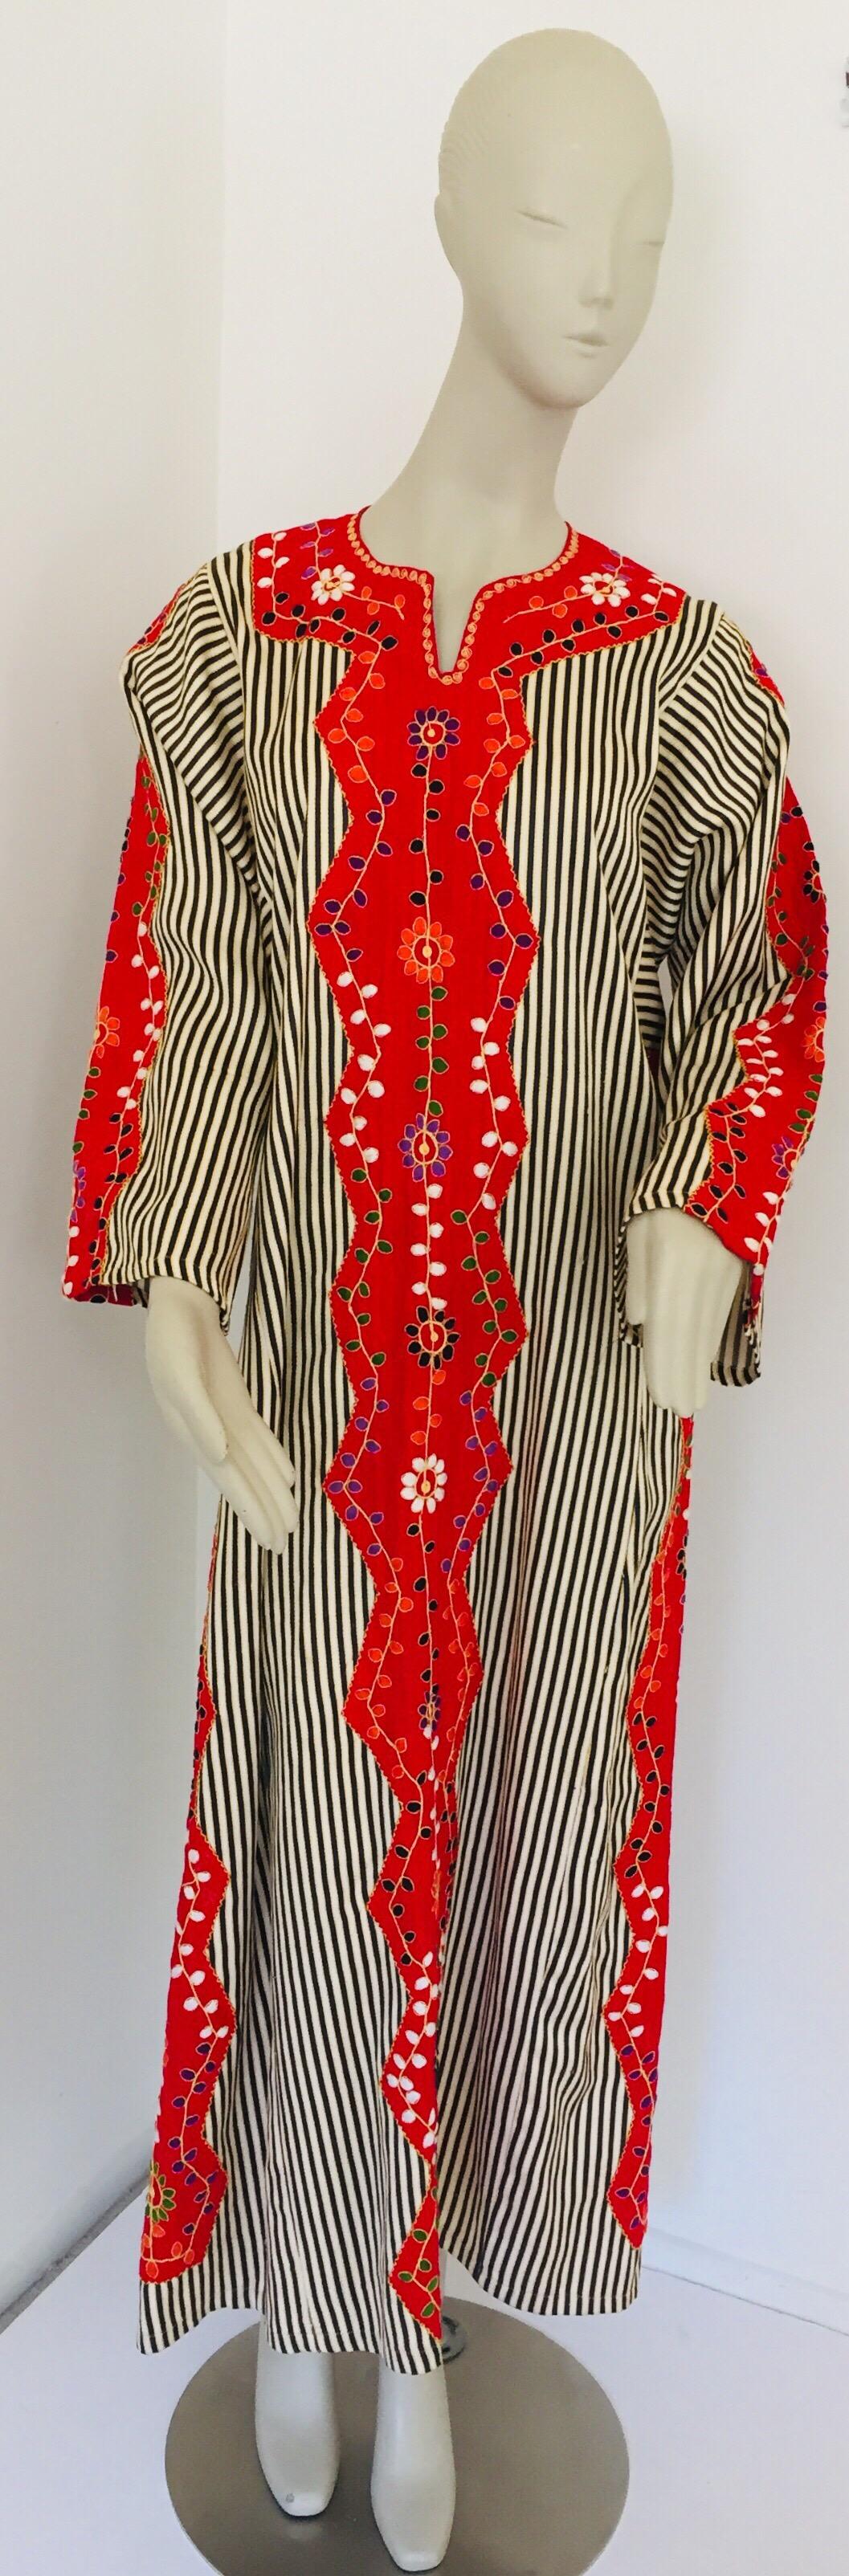 Vintage Middle Eastern kaftan, red embroidered cotton striped maxi dress.
This chic Bohemian maxi dress kaftan is embroidered and embellished by hand. 
It is a slip on light and comfy, cotton fabric.
Vintage exotic 1970s ethnic kaftan. 
Dress